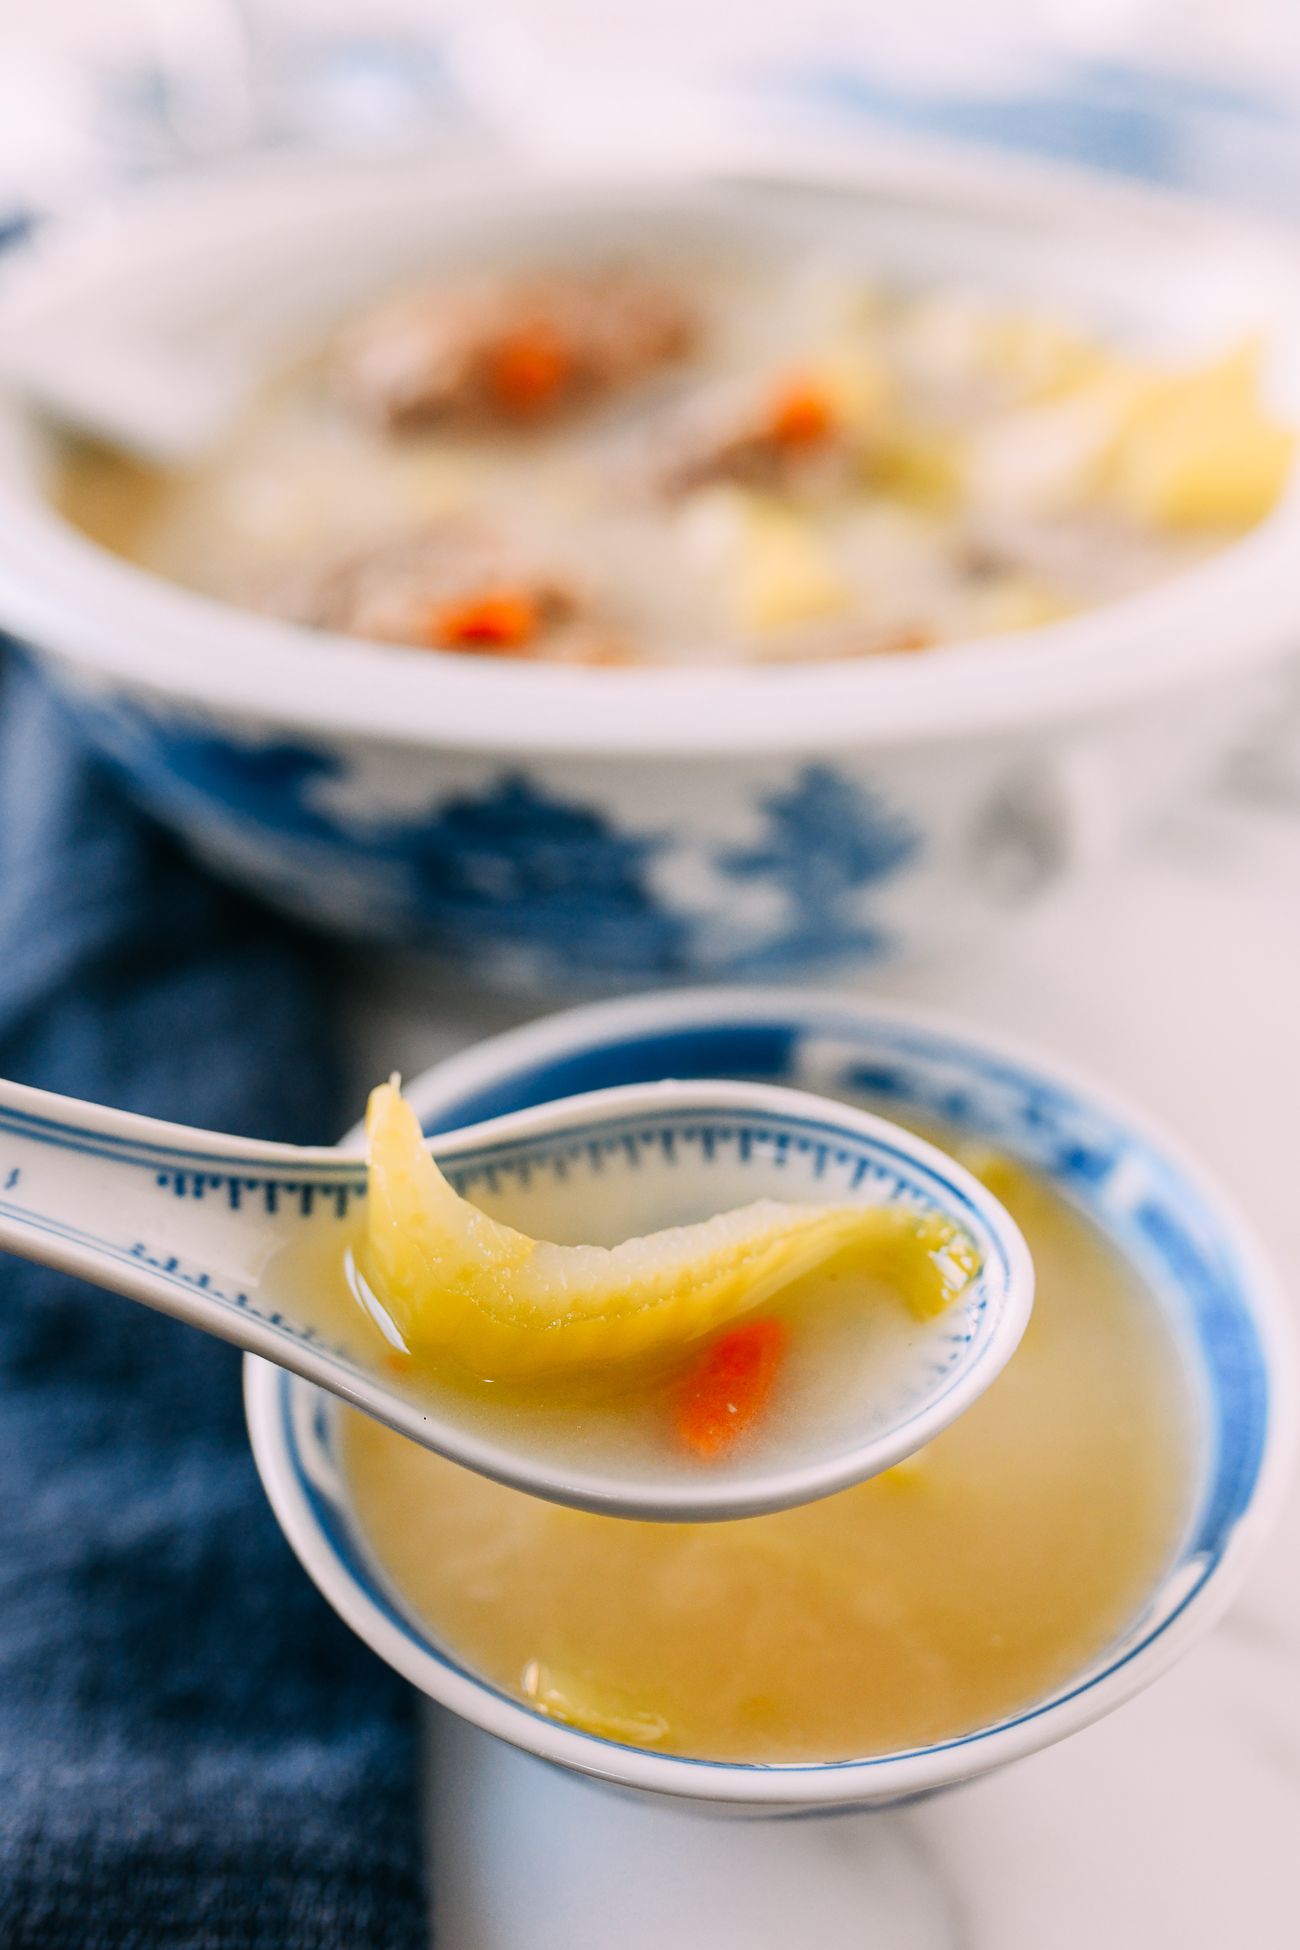 Chinese Mustard Green Soup with Pork Bones, Goji Berries, and Dates